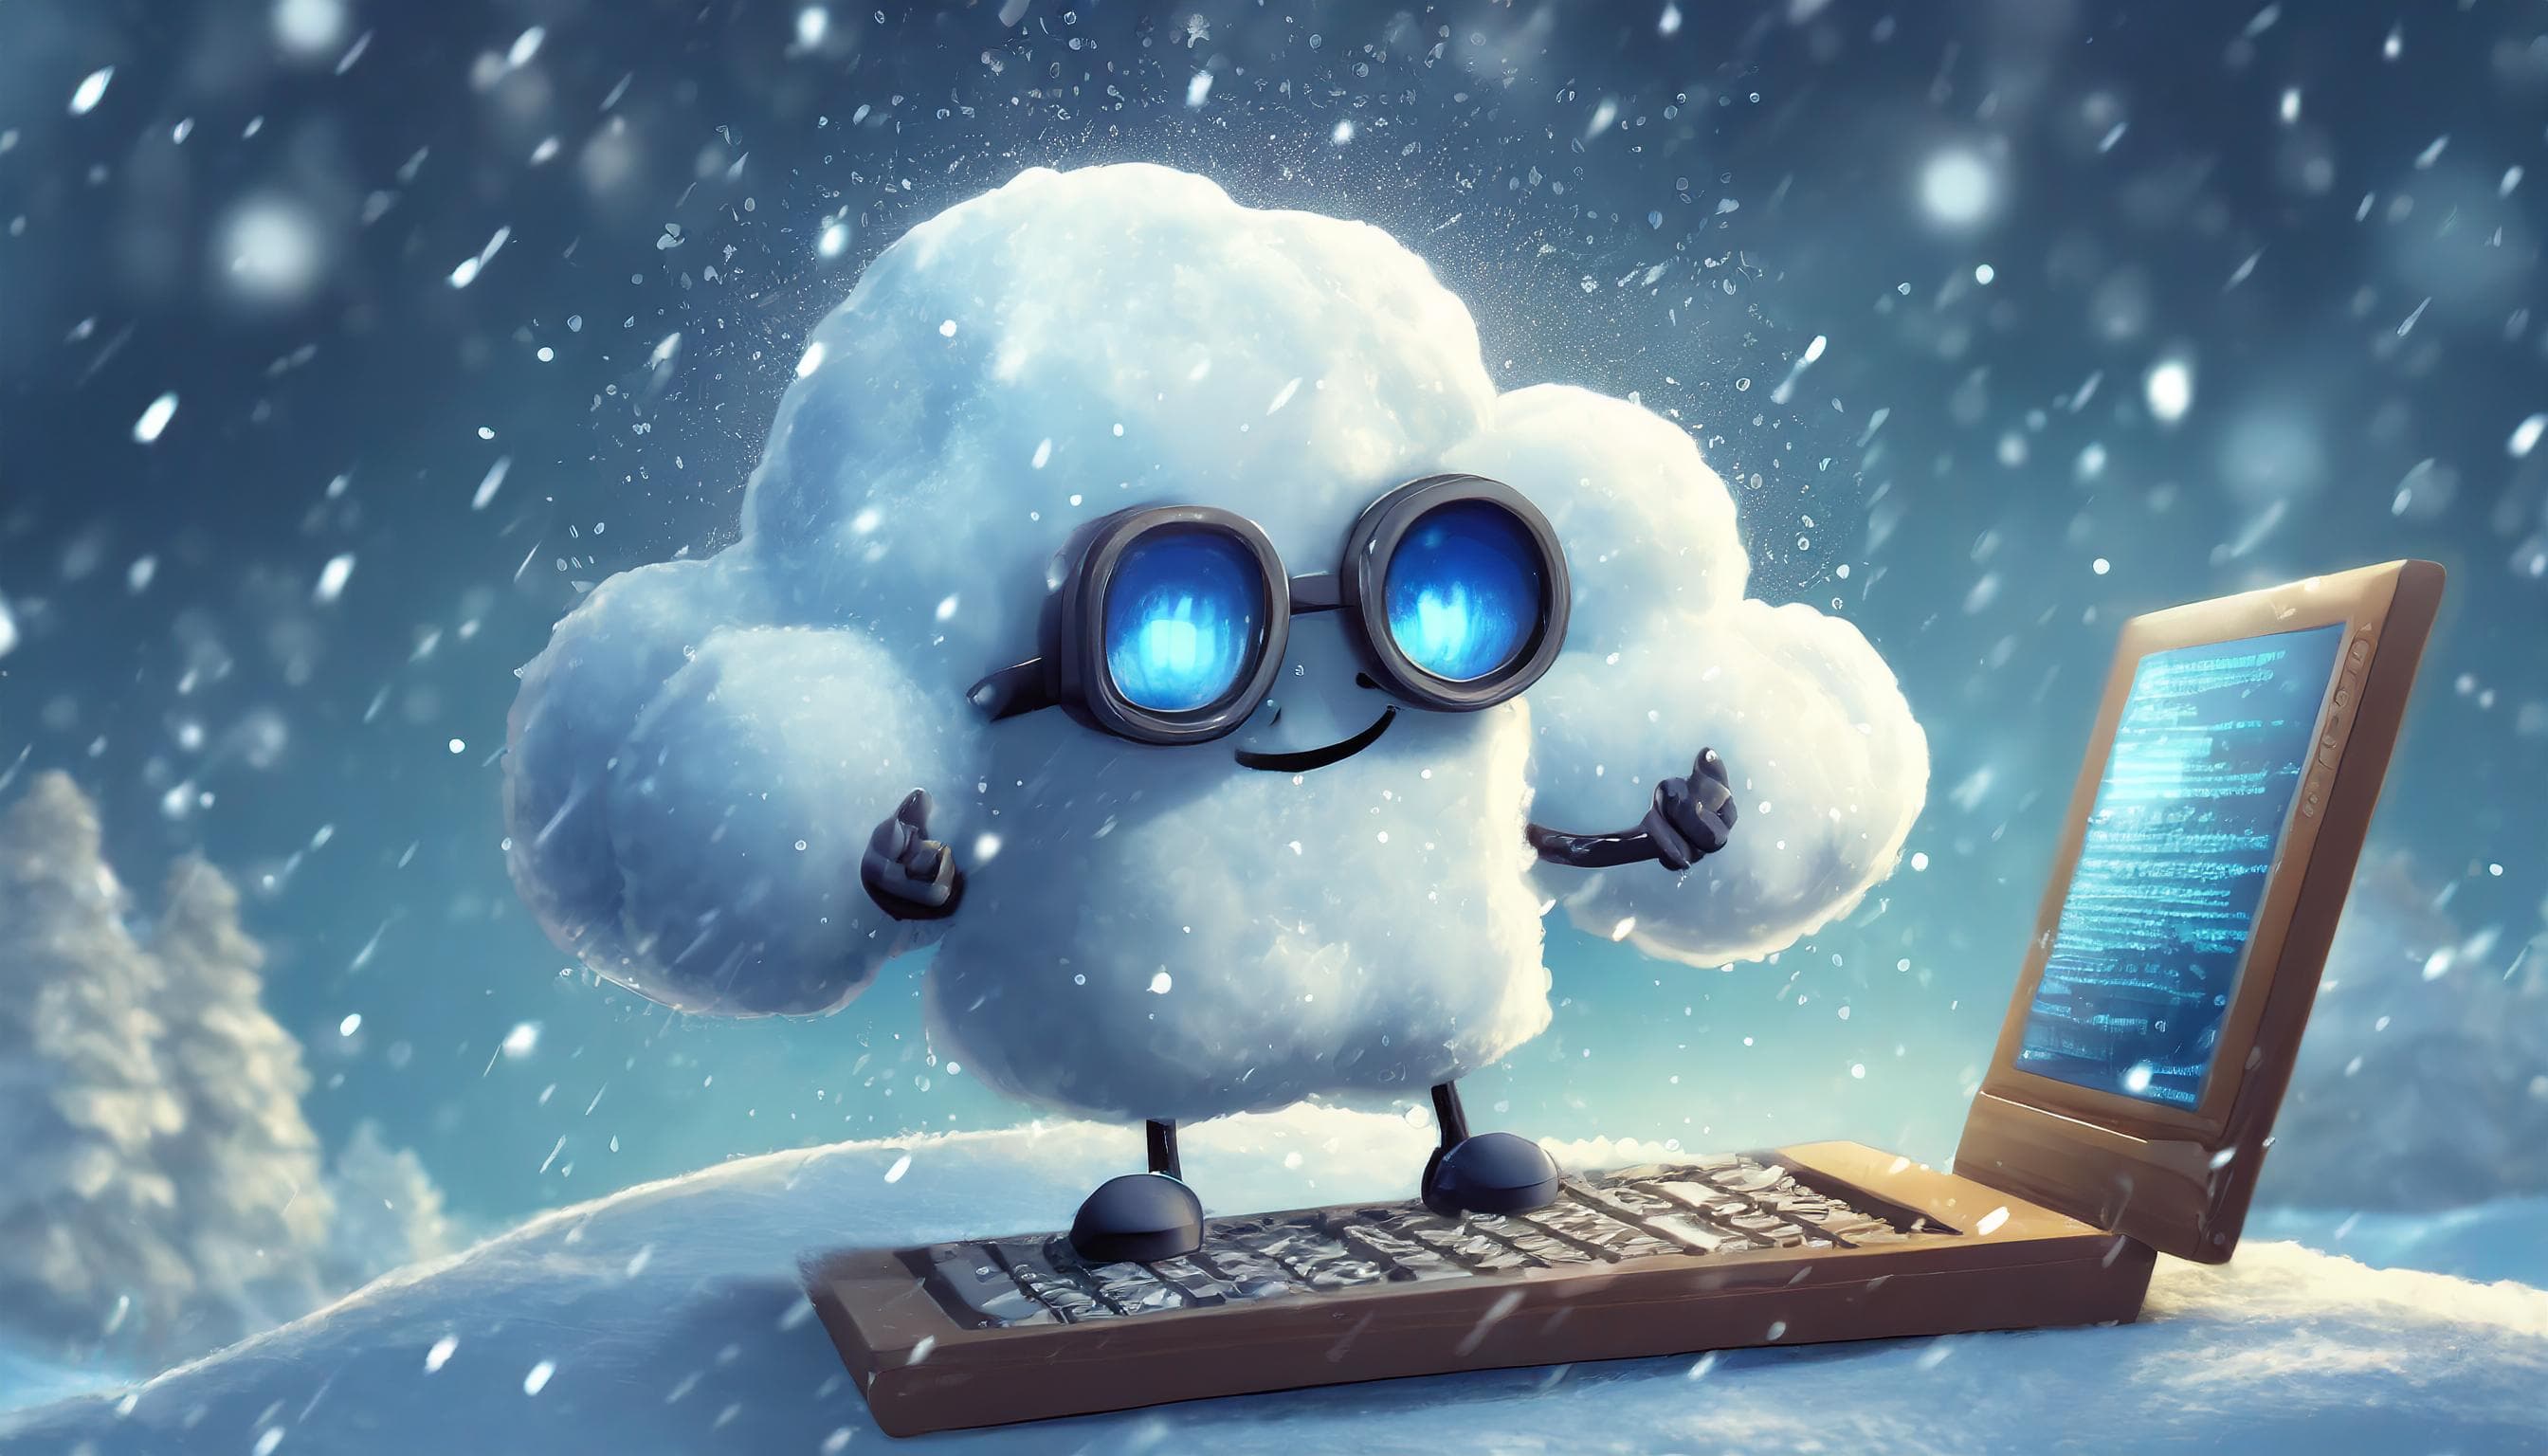 Cover Image for Snowflurry™ v0.1.0 is released!